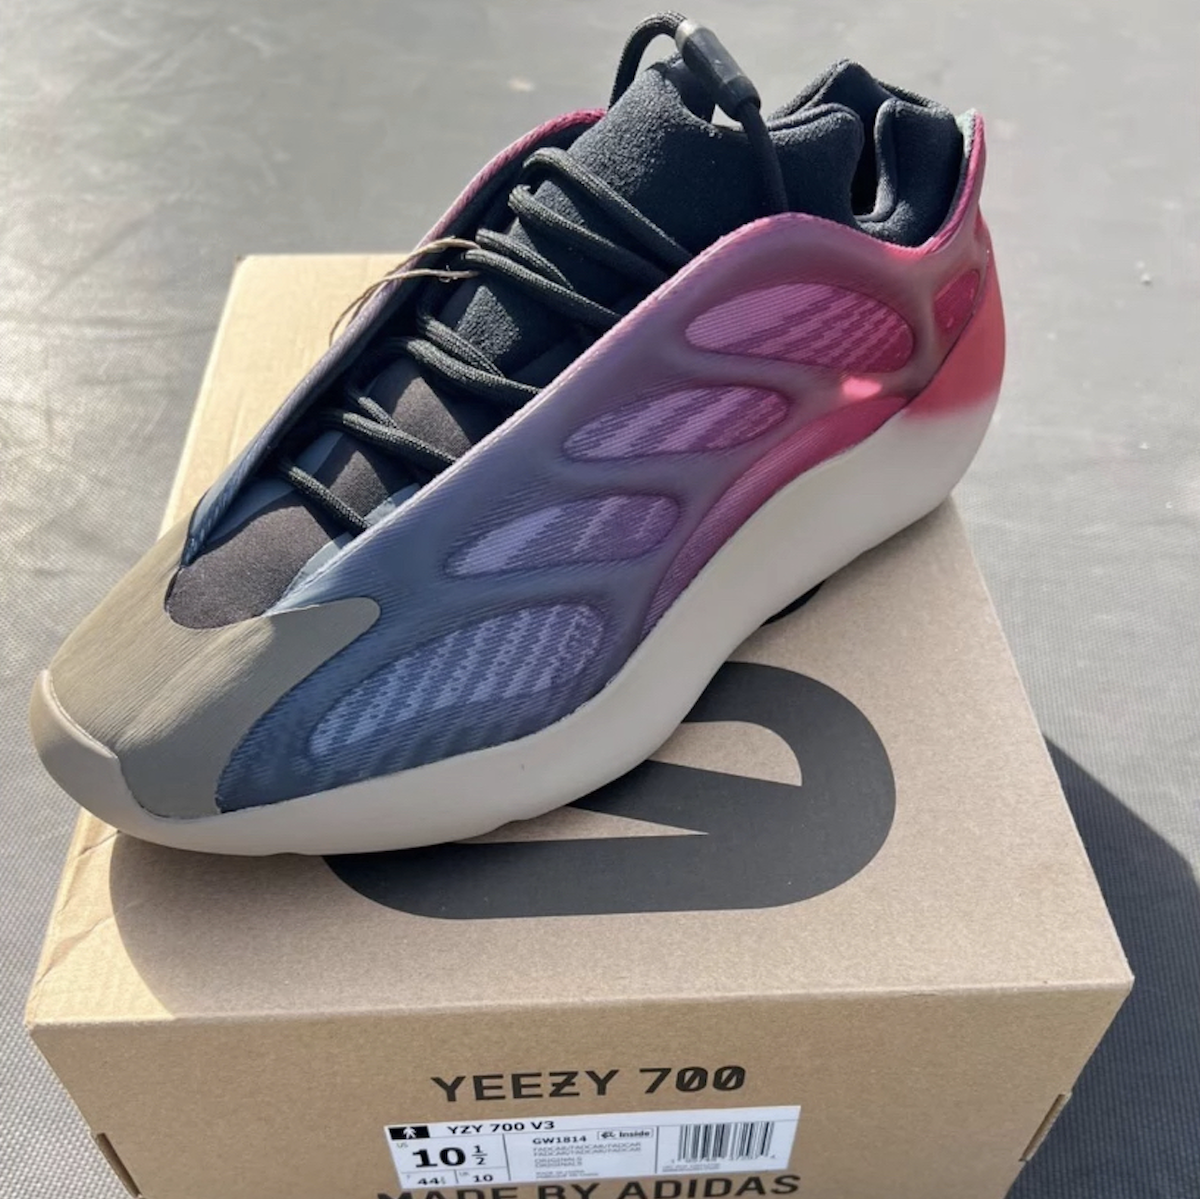 adidas Yeezy 700 V3 Fade Carbon GW1814 Release Date Info